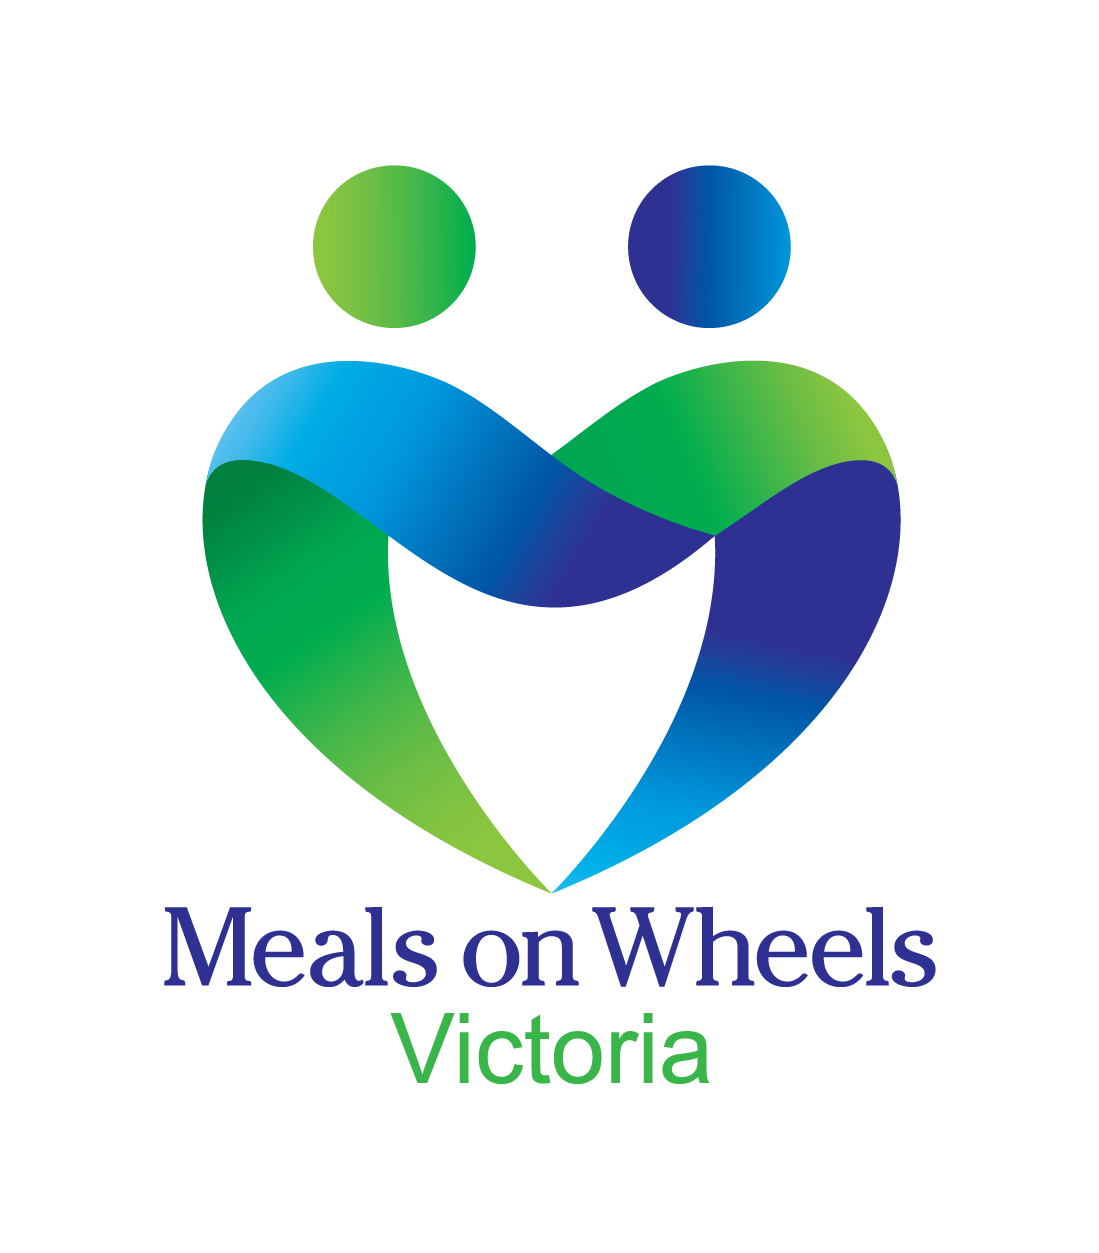 Administration Officer at Meals on Wheels Victoria - Volunteers